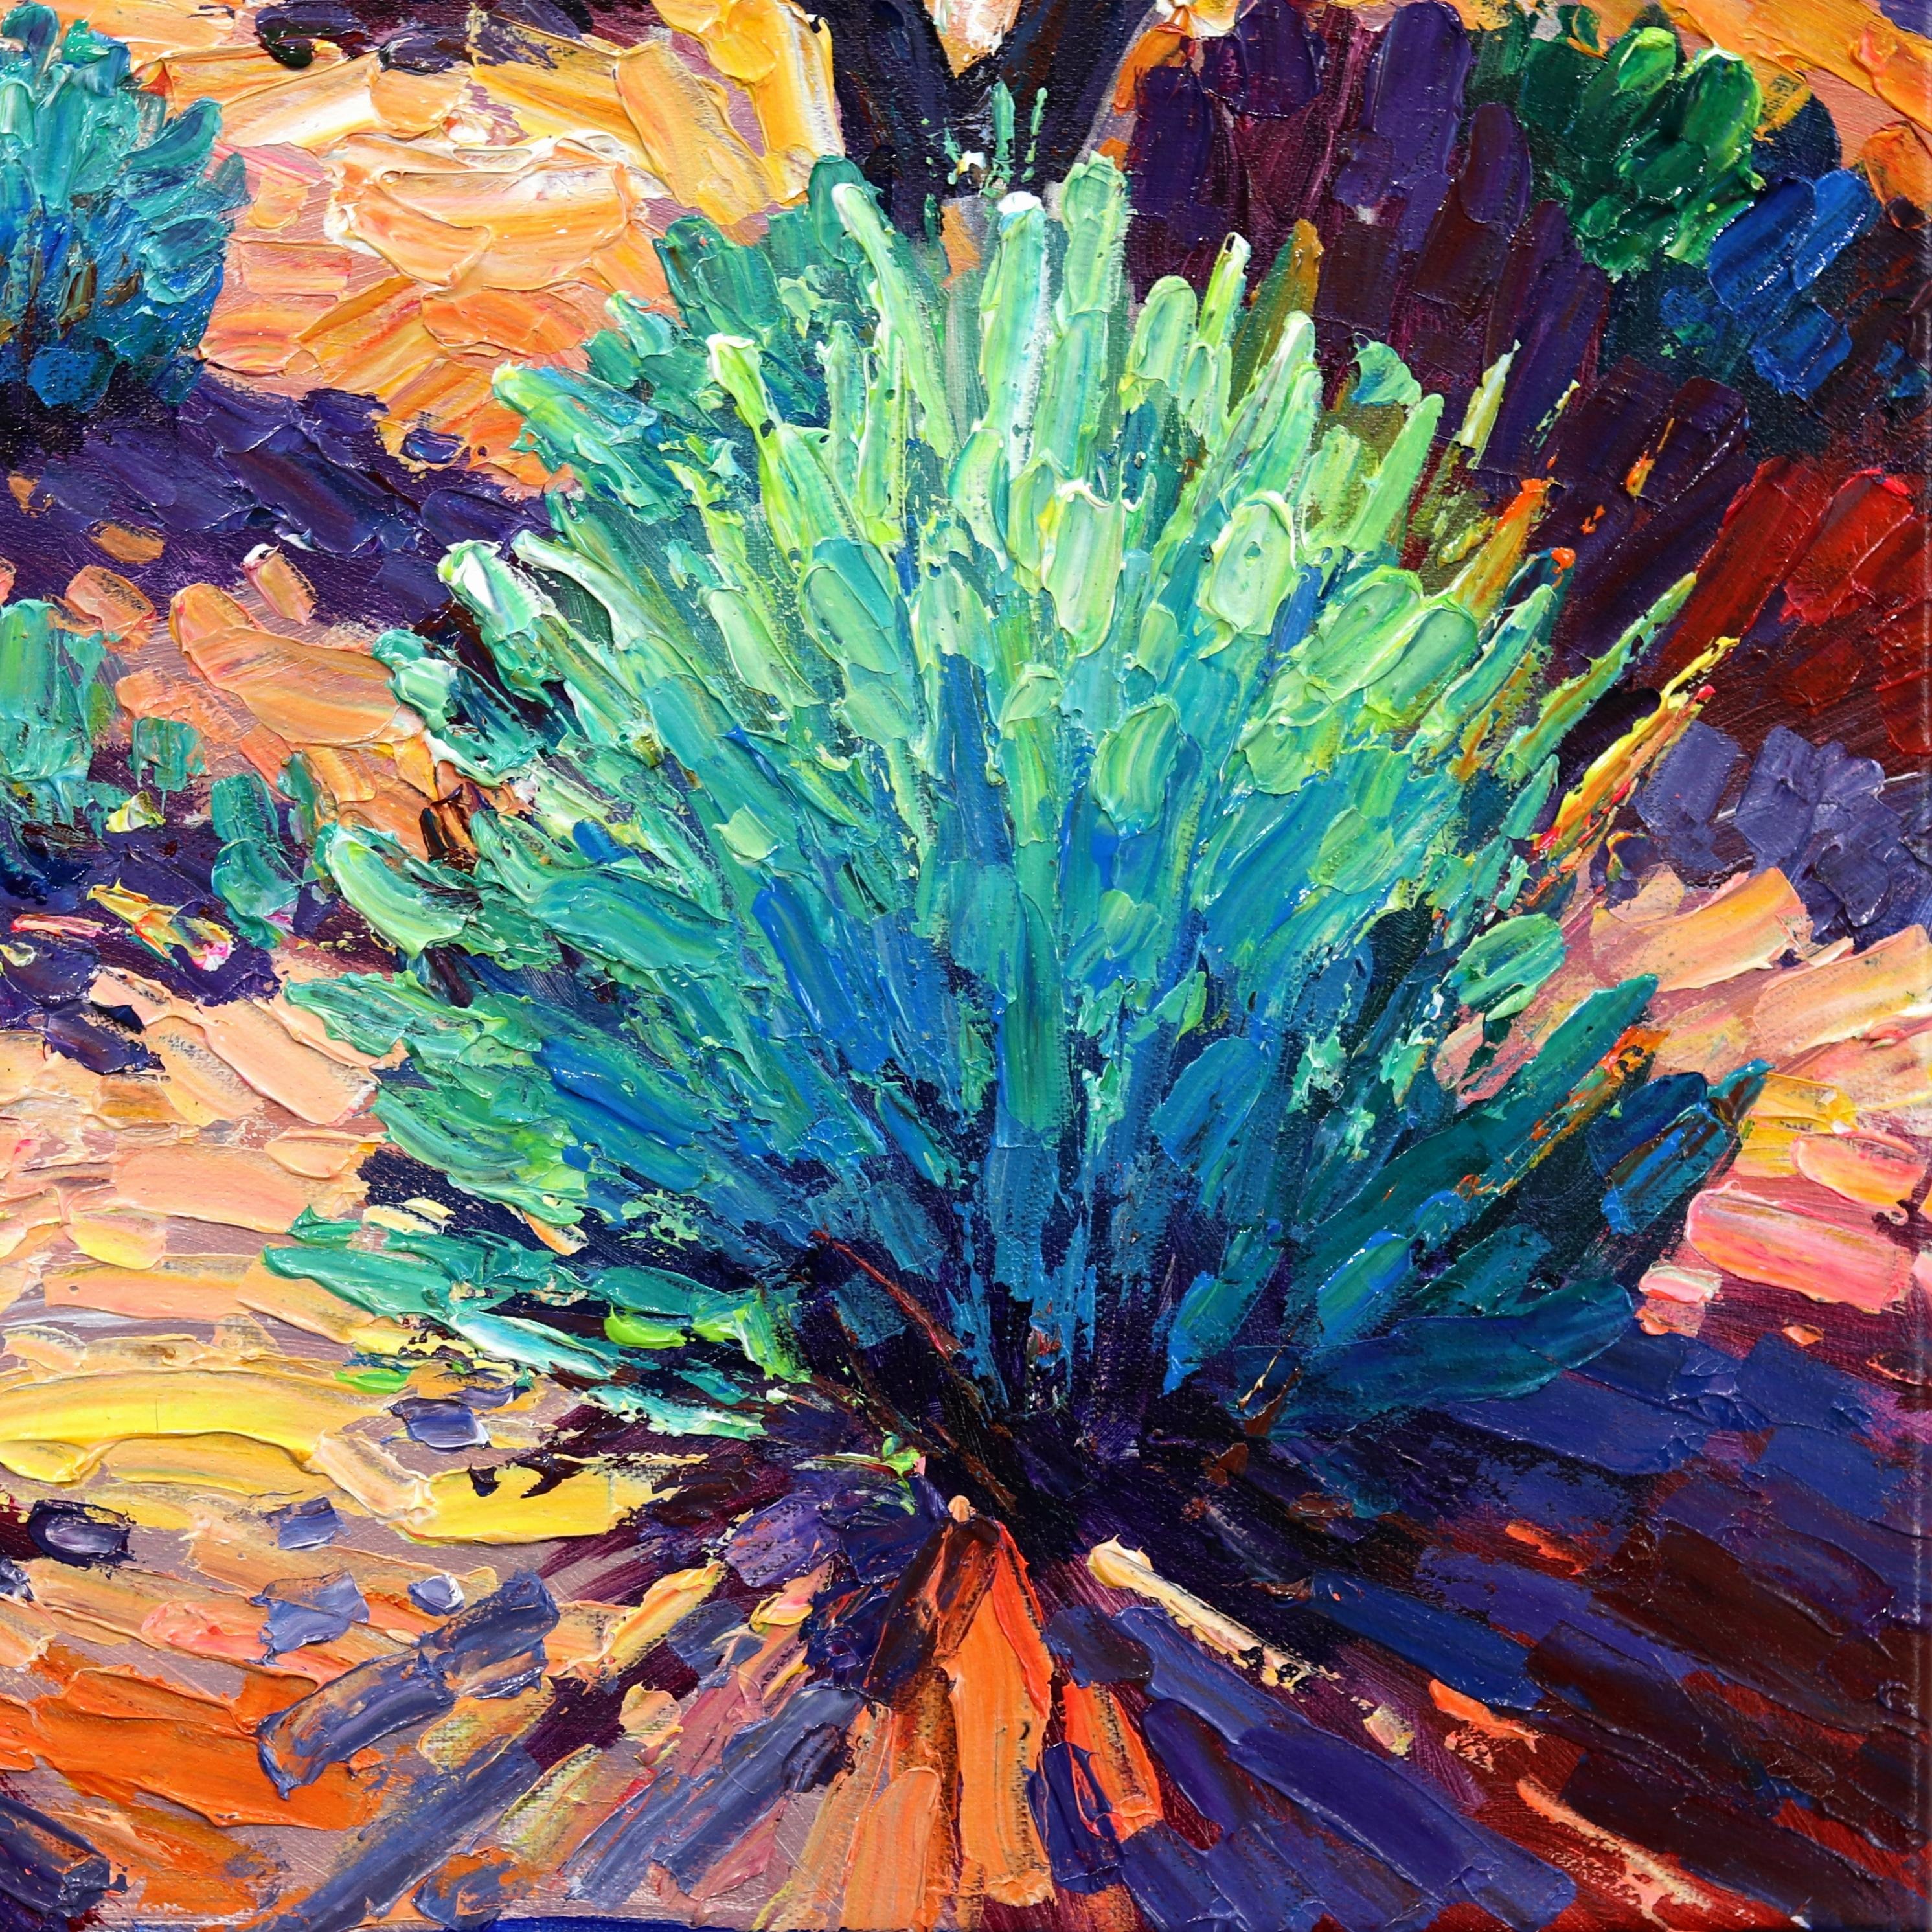 A Spark in the Sky - Vibrant Textural Mountain Desert Landscape Oil Painting 2